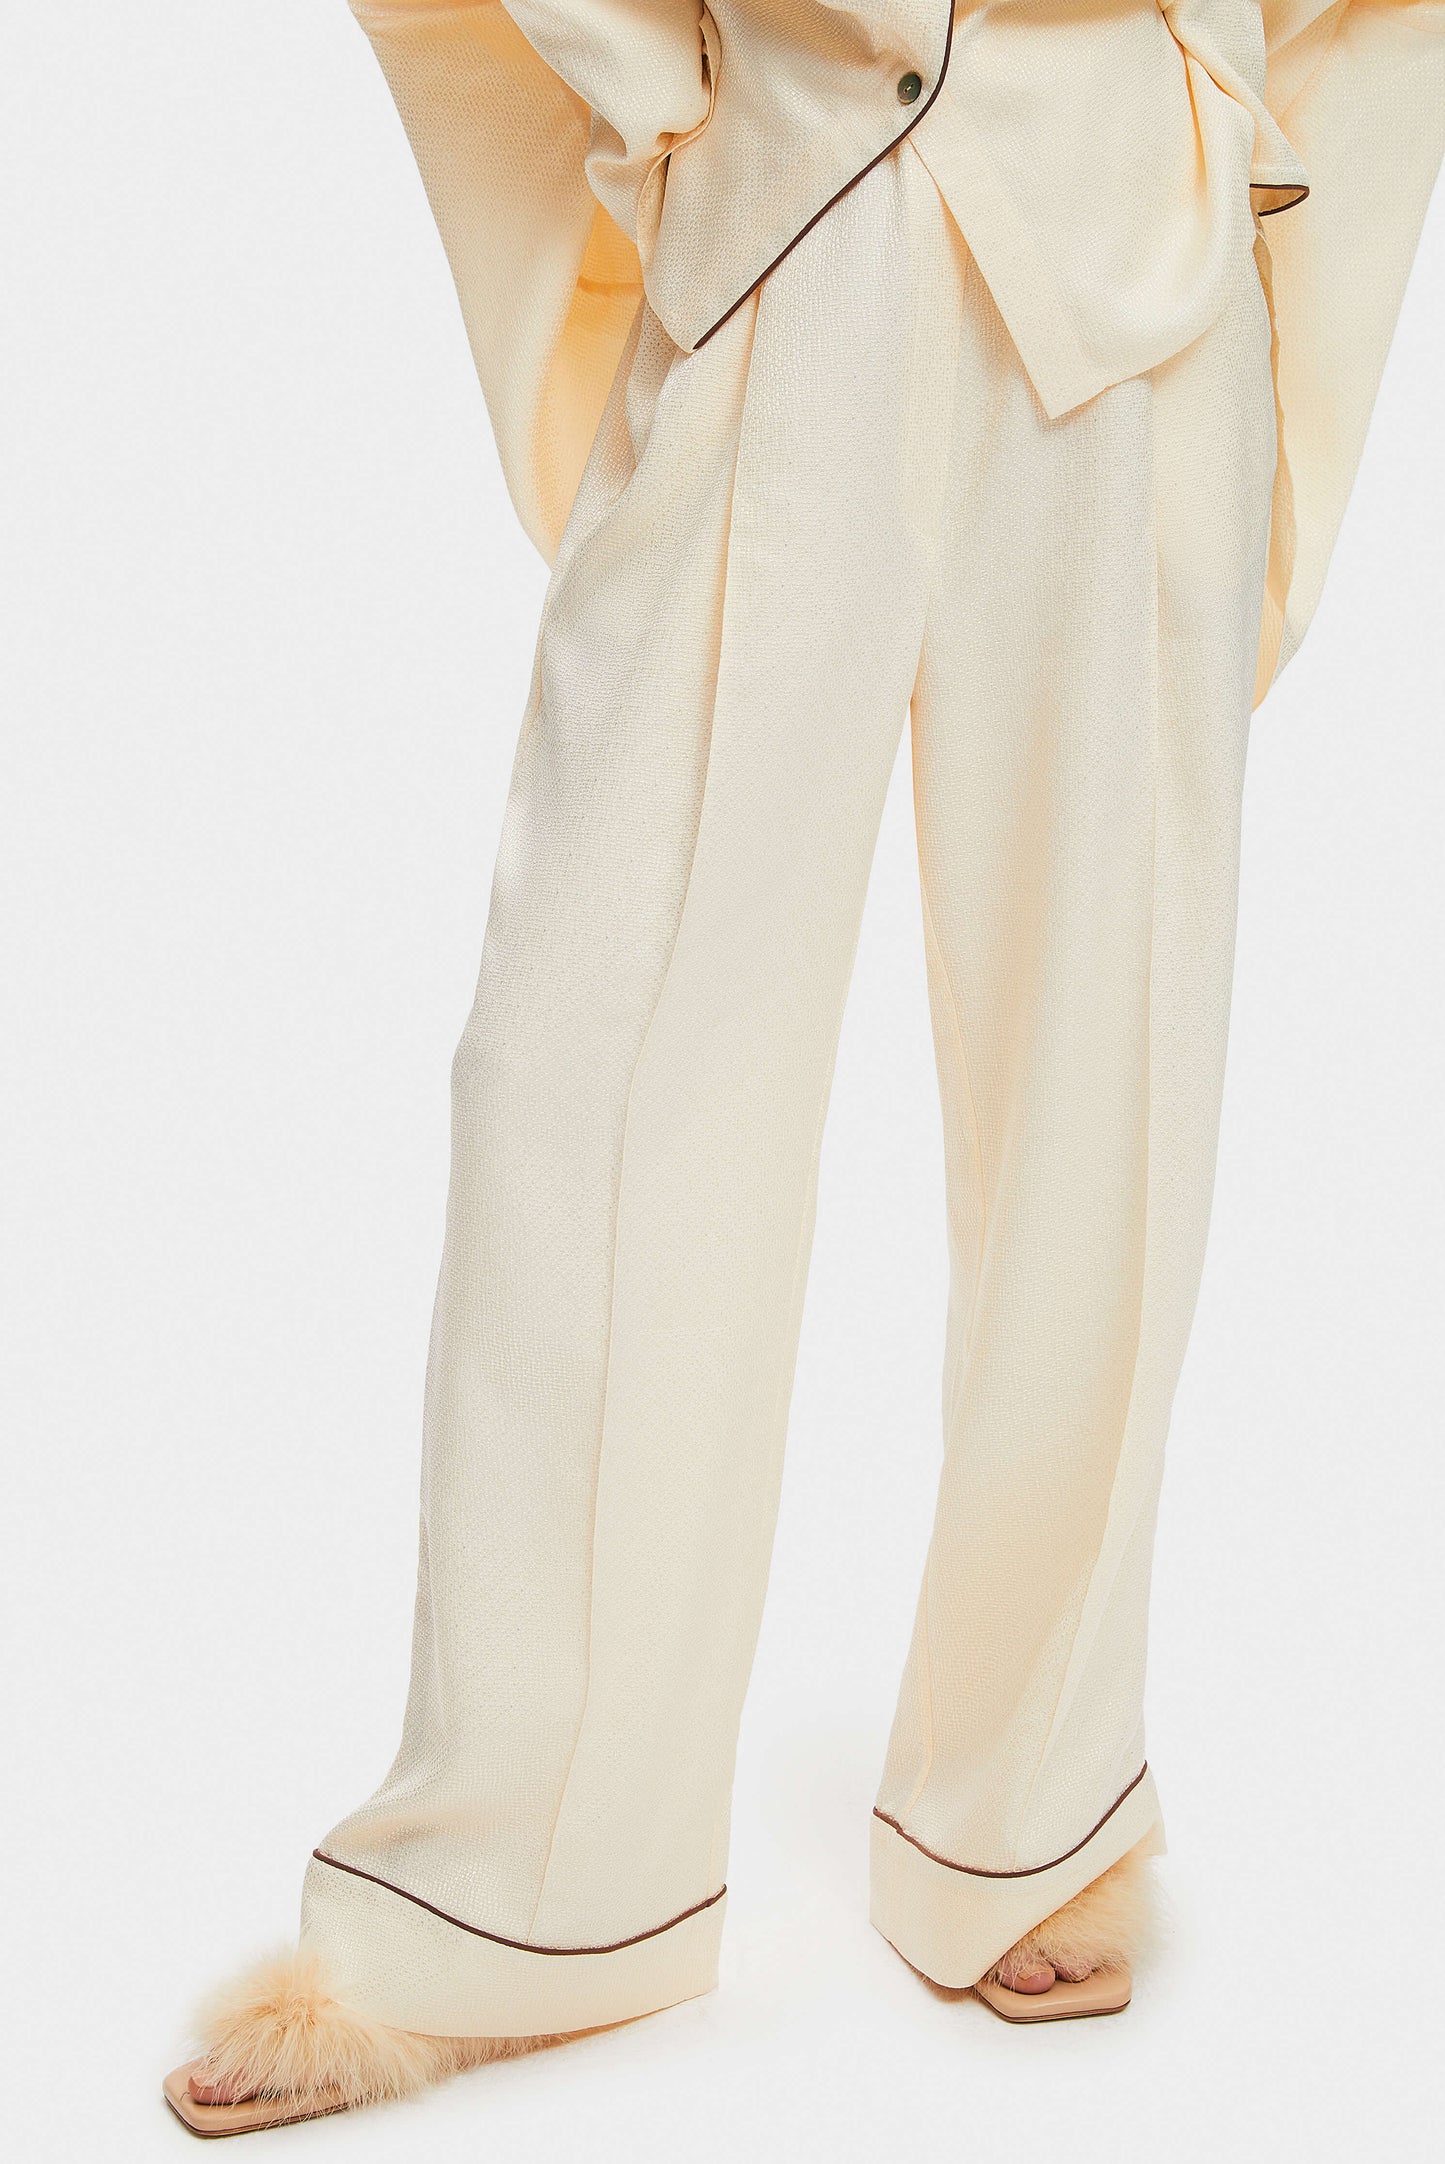 Pastelle Oversized Jacquard Pants in Pearl